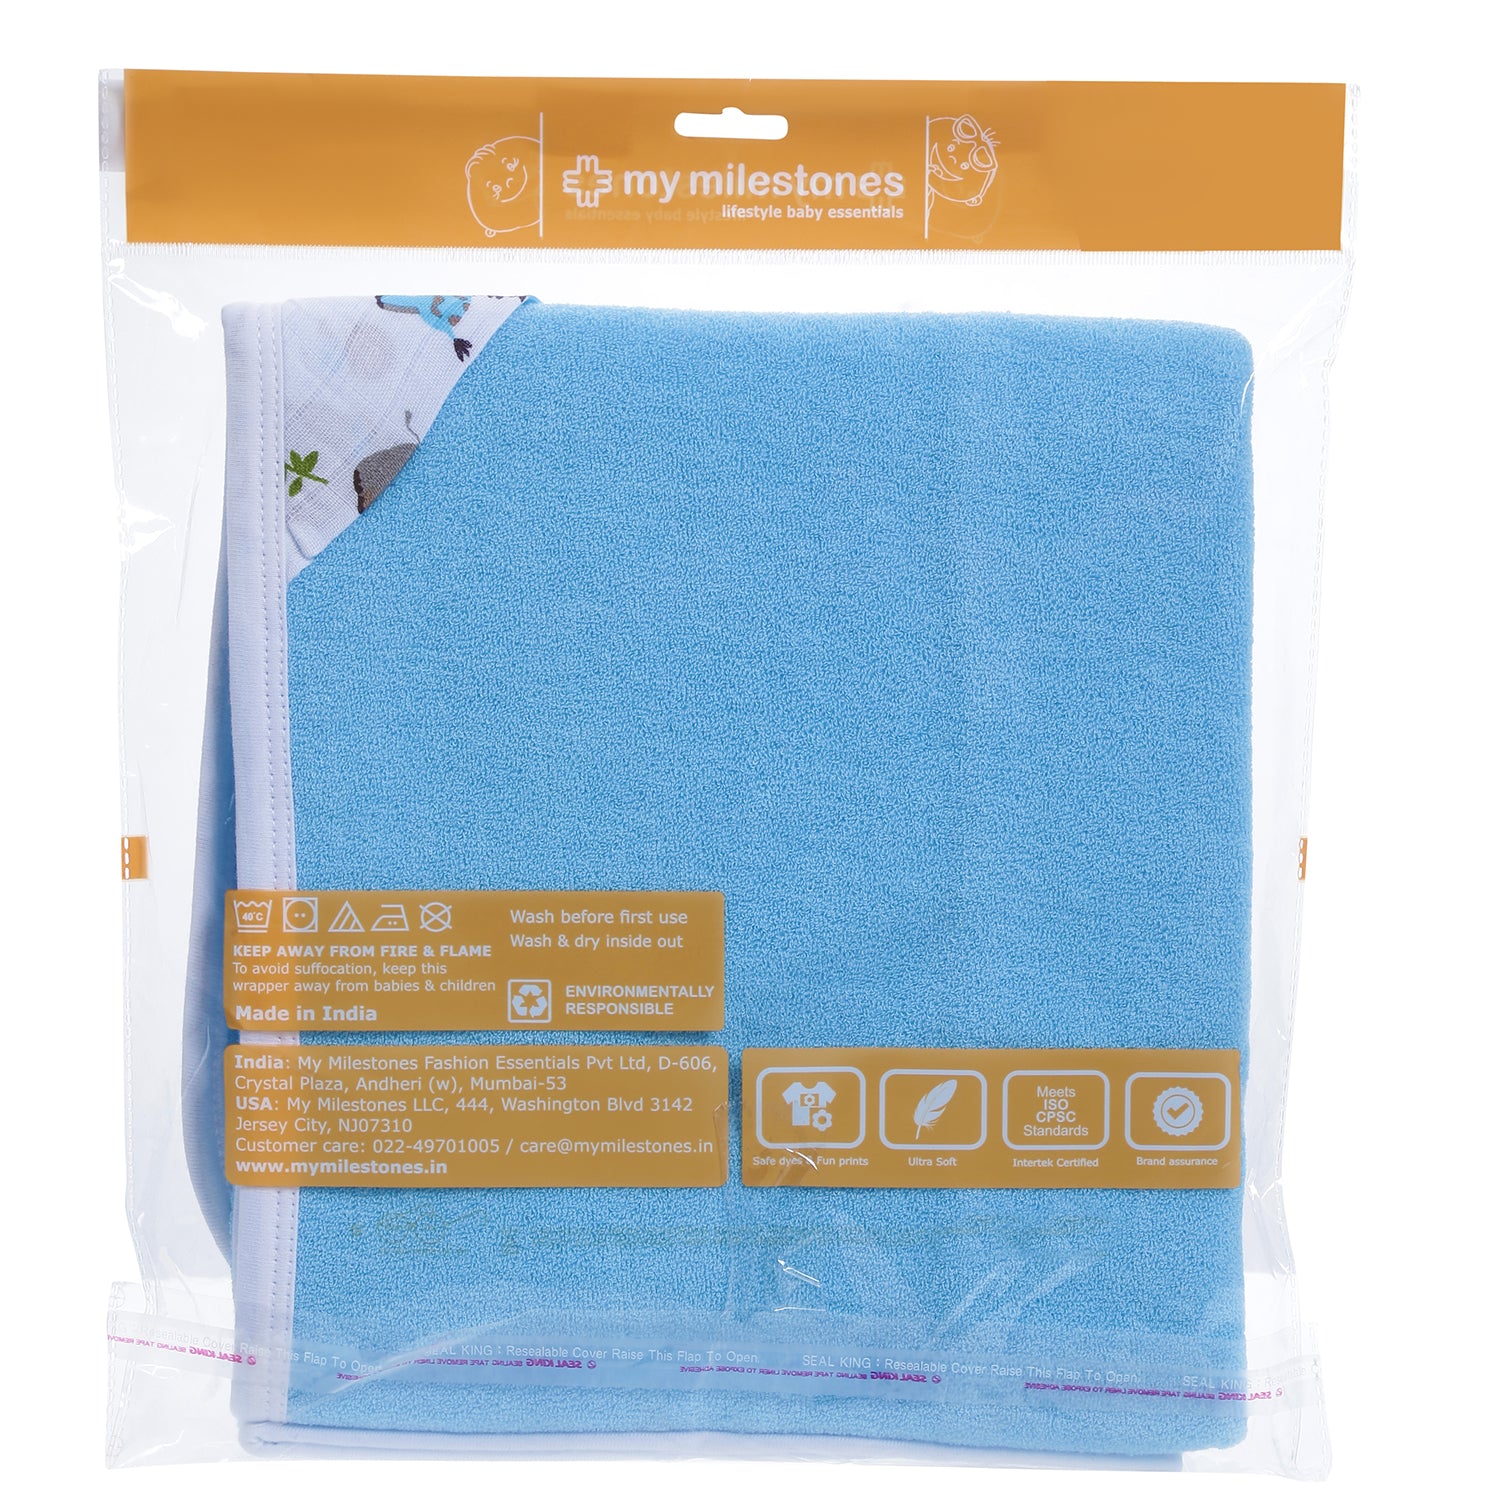 My Milestones 100% Premium Cotton Single Layered Terry Hooded Baby / Toddlers Bath Towel - Blue Solid